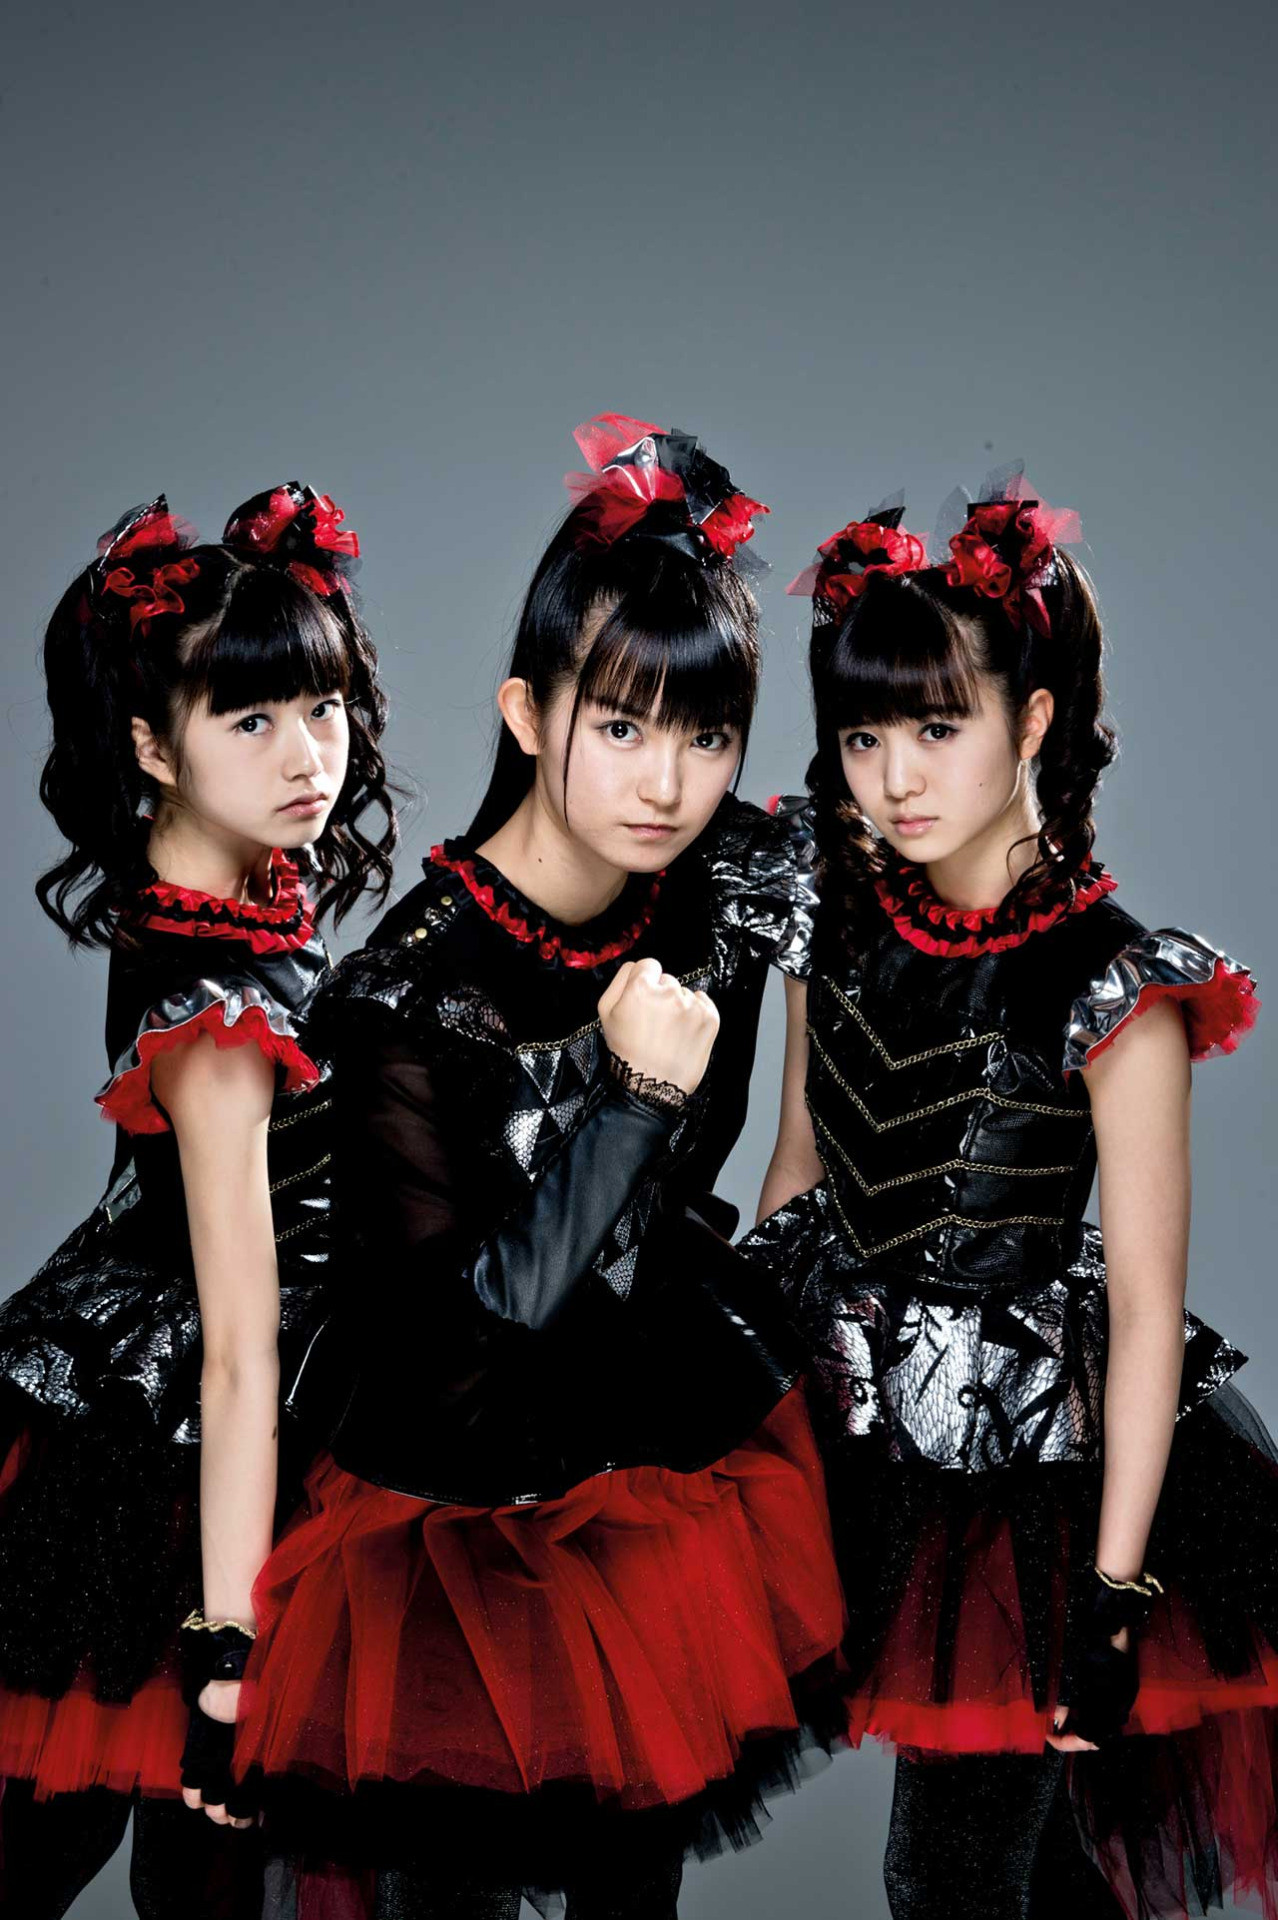 1278x1920 Babymetal... Lord help me, this has to be one of the cutest